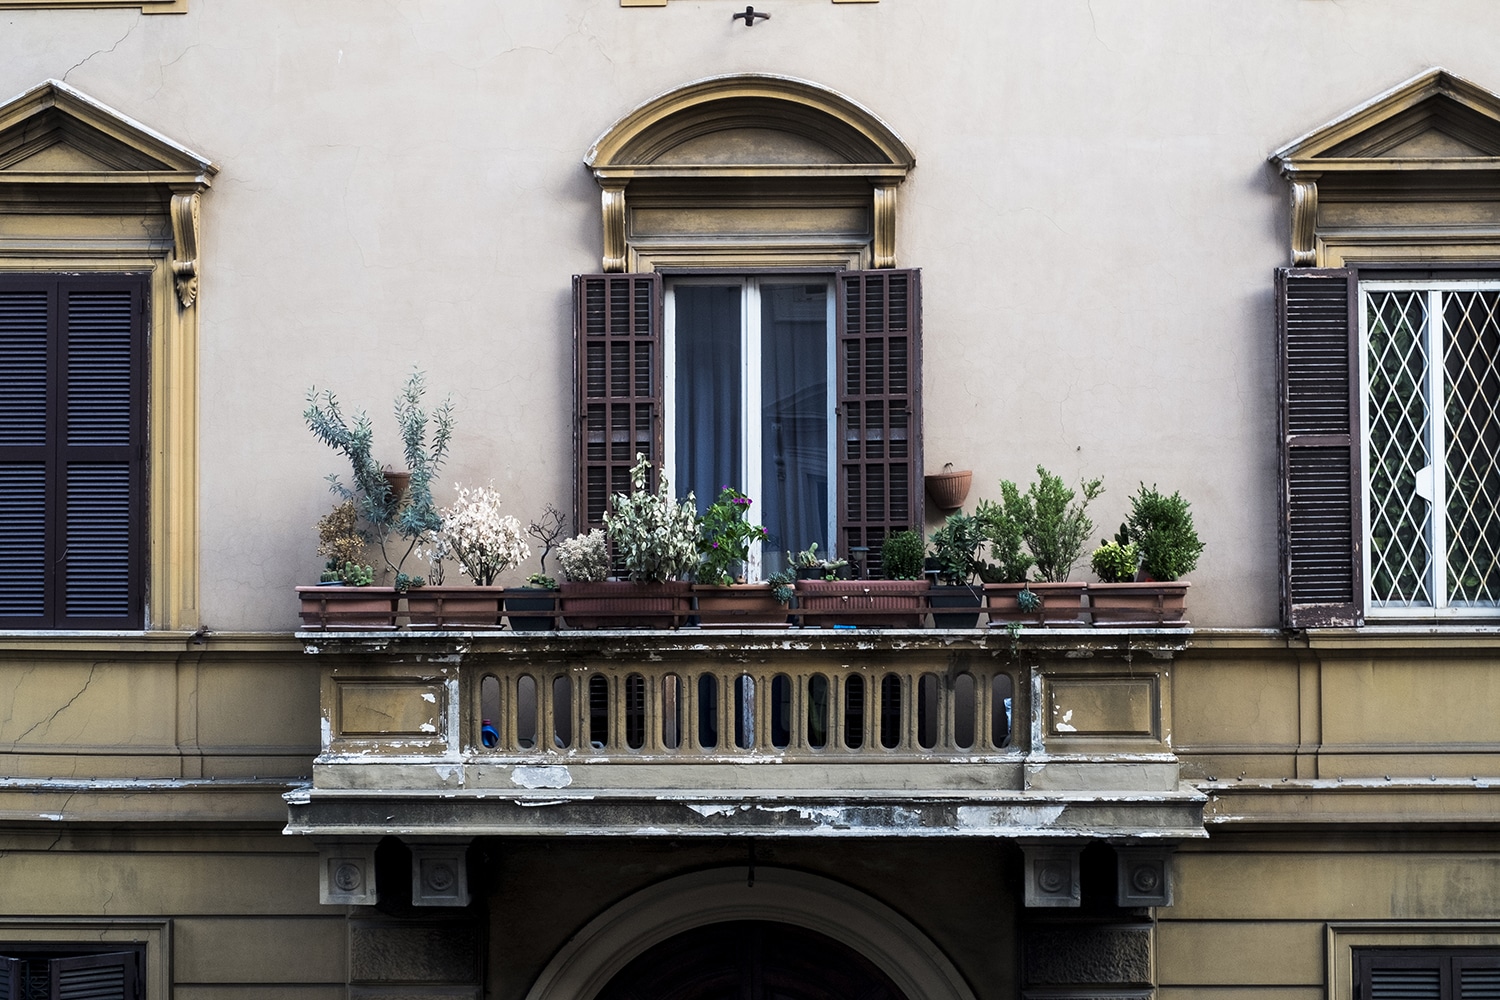 Rome Balcony Street Architecture Landscapes Photography Architecture 2